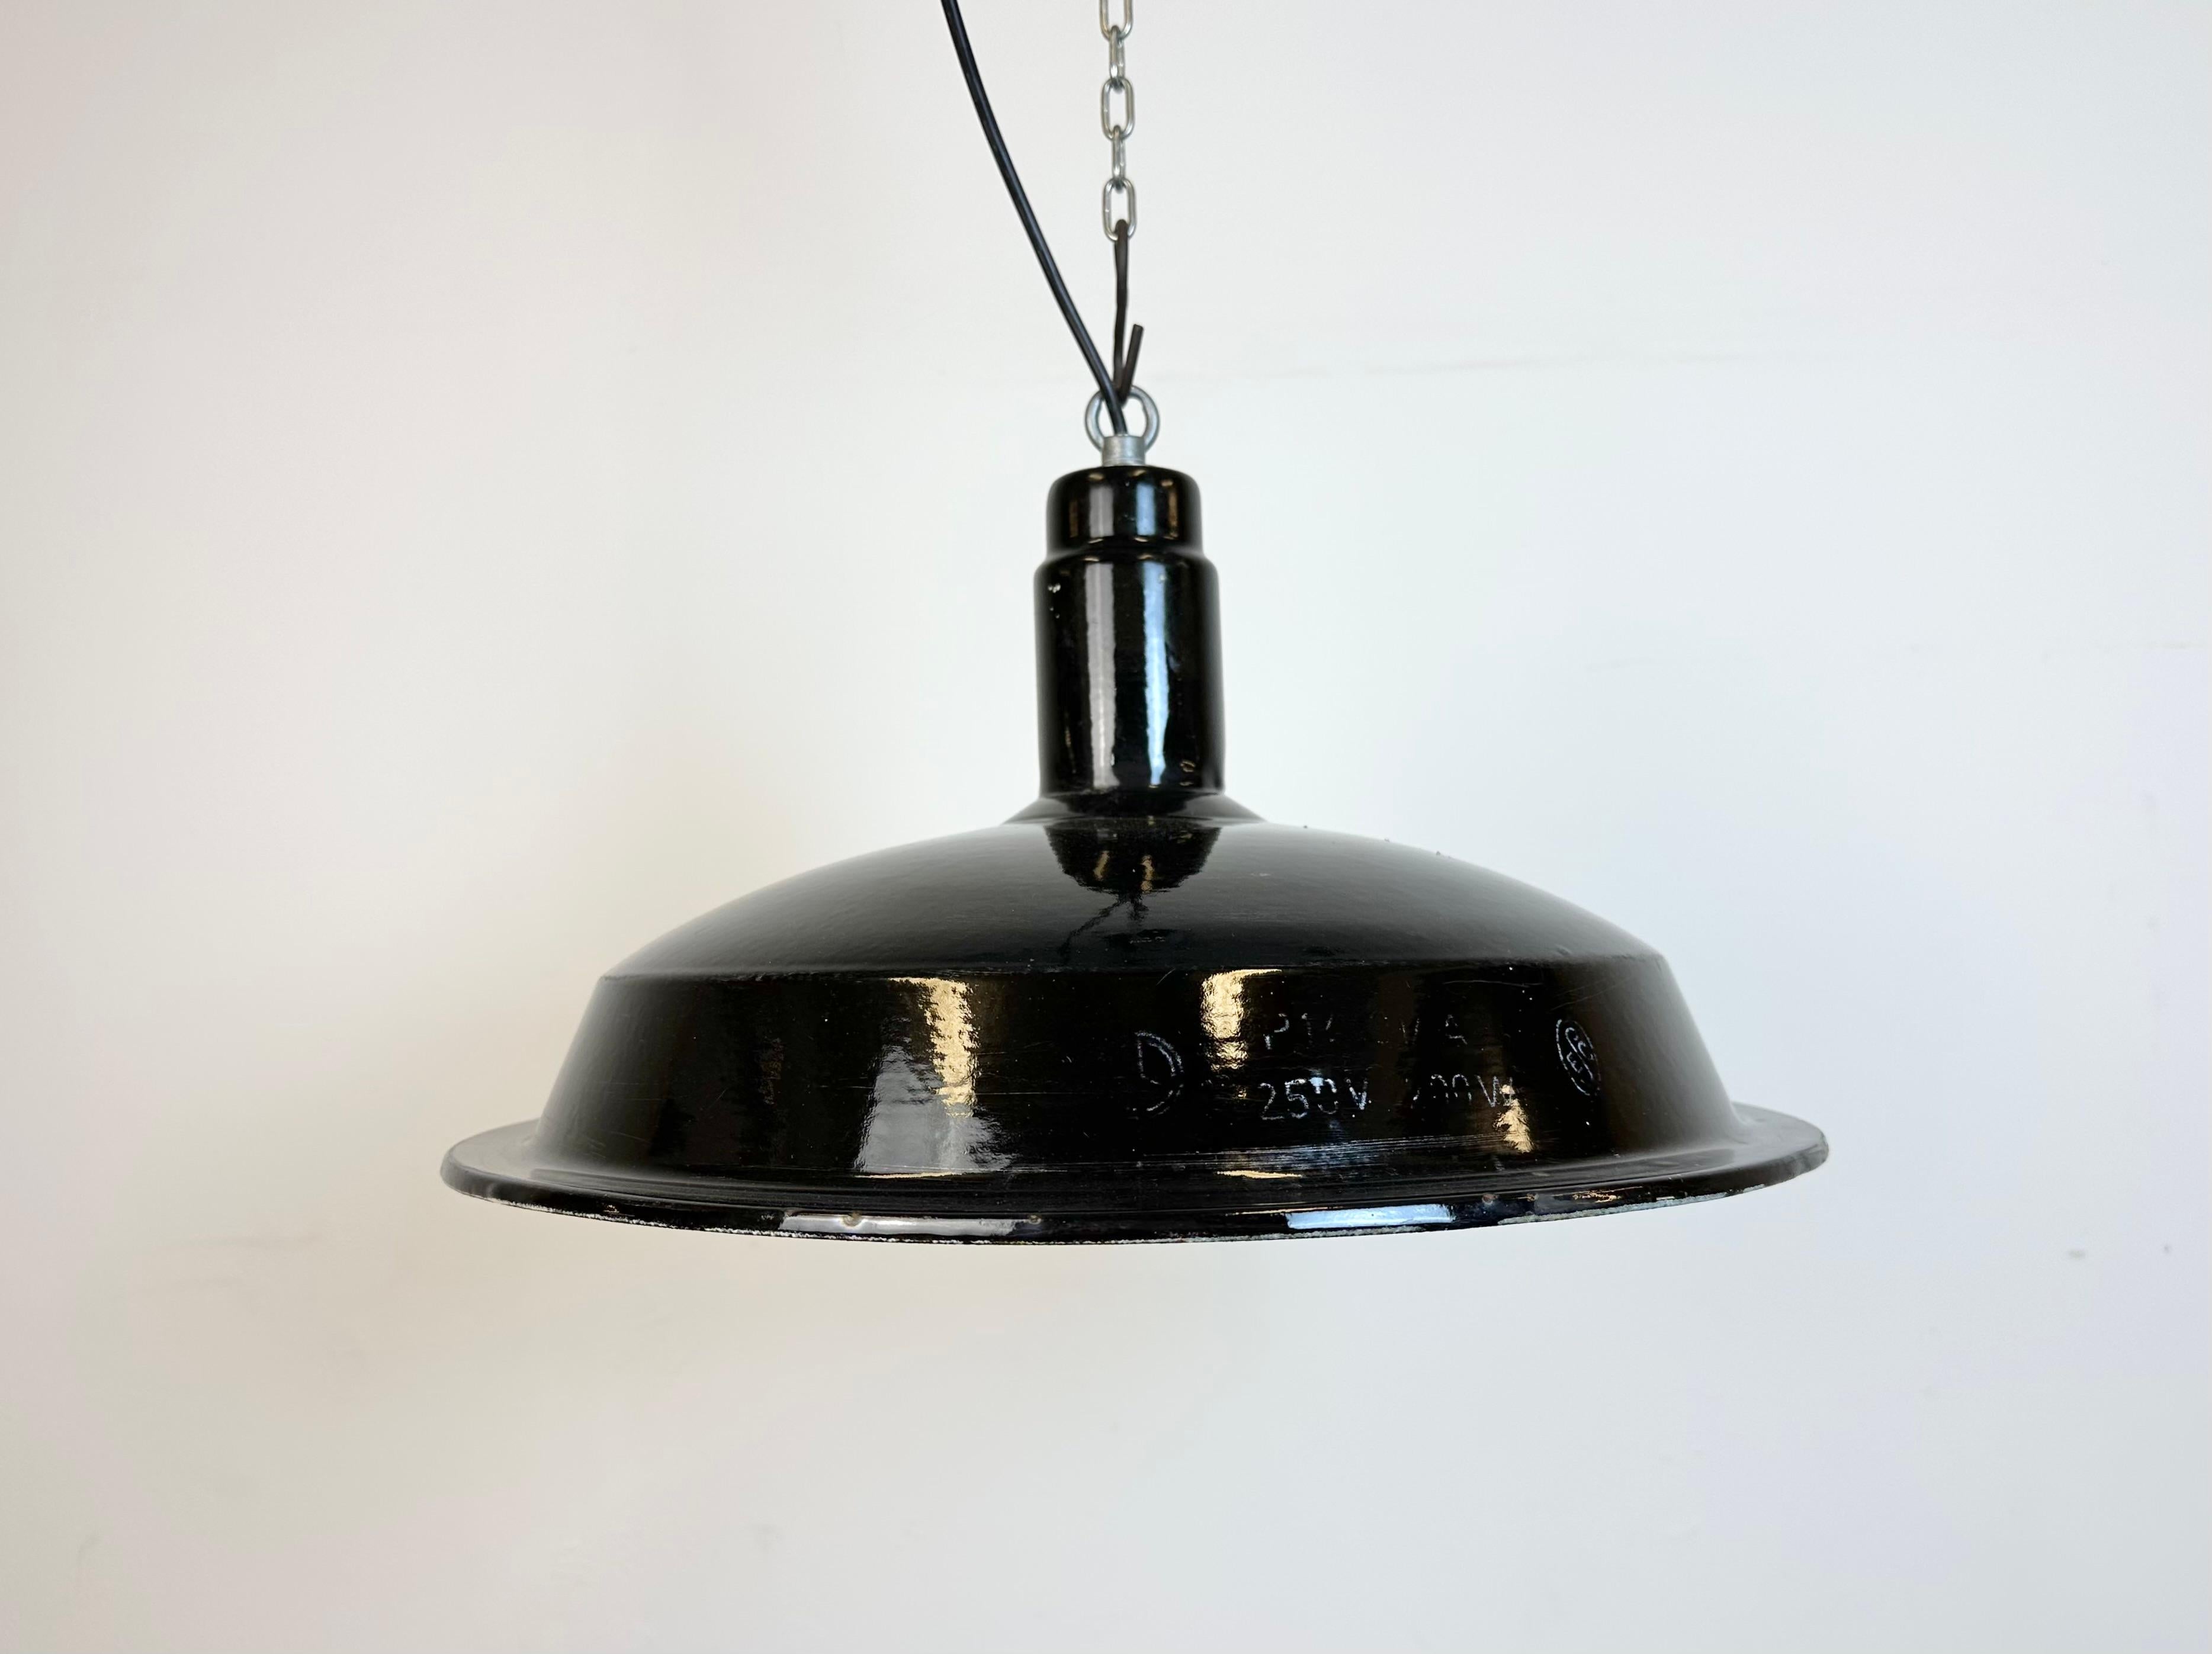 Industrial factory hanging lamp made in former Czechoslovakia during the 1950s. It features a black enamel shade with white enamel interior and an iron top. New  socket requires standard E 27/ E 26 light bulbs. New wire. The lamp weighs 1,3 kg. The